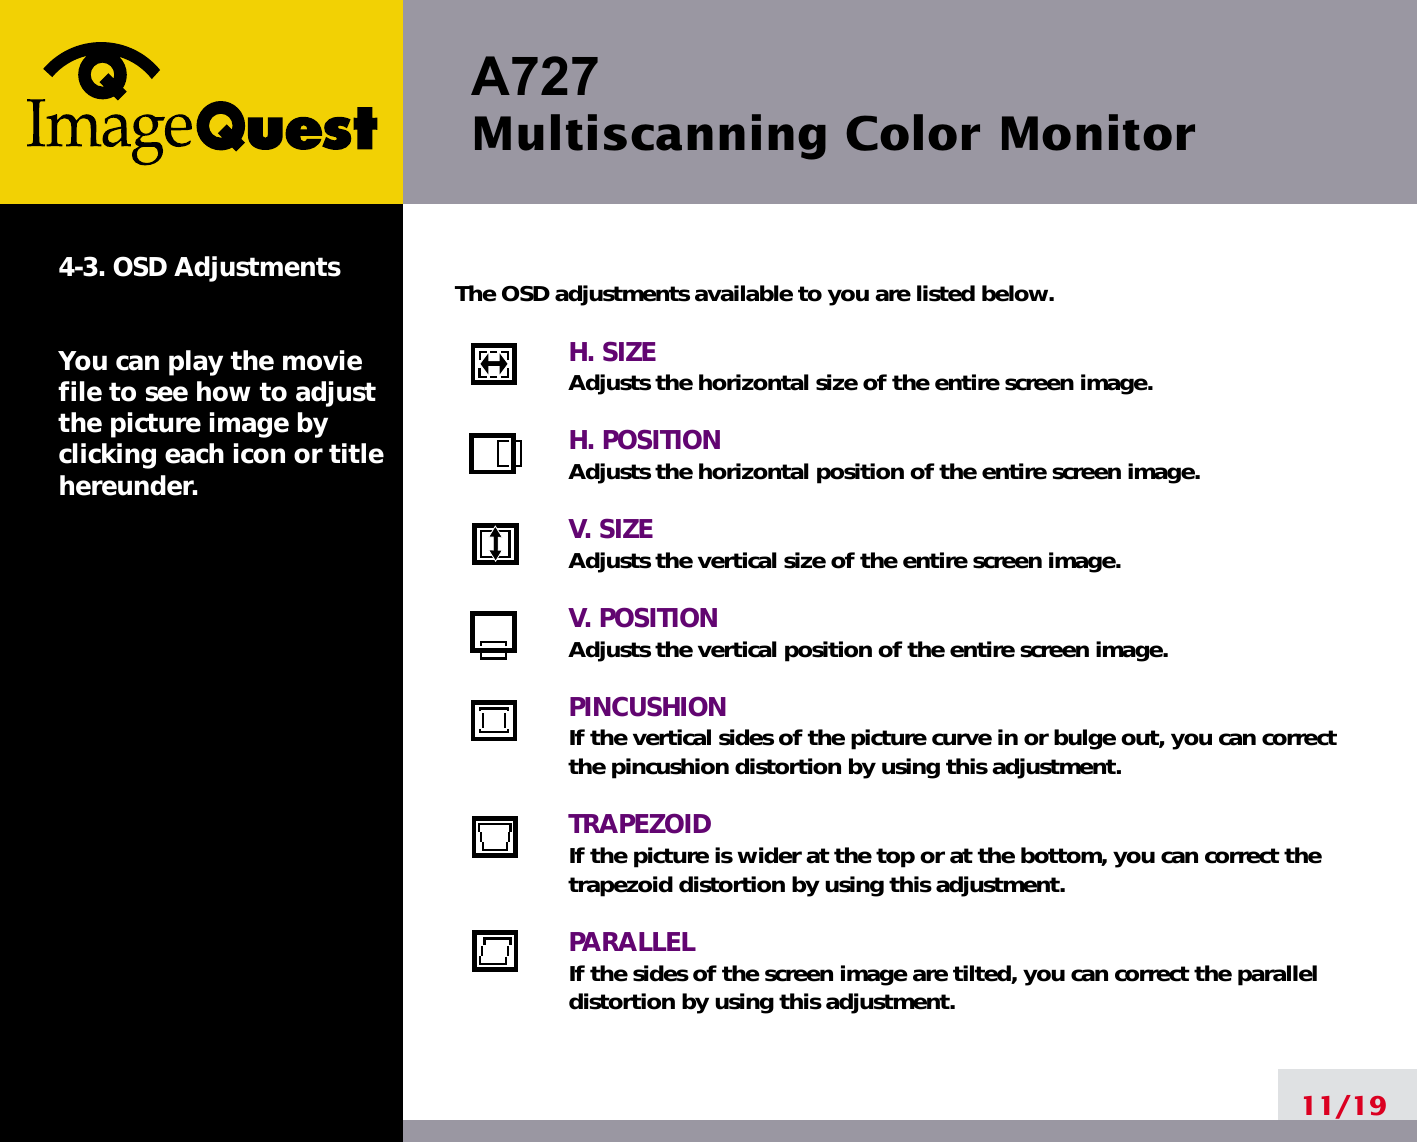 A727 Multiscanning Color Monitor11/194-3. OSD AdjustmentsYou can play the moviefile to see how to adjustthe picture image byclicking each icon or titlehereunder.The OSD adjustments available to you are listed below.H. SIZEAdjusts the horizontal size of the entire screen image.H. POSITIONAdjusts the horizontal position of the entire screen image.V. SIZEAdjusts the vertical size of the entire screen image.V. POSITIONAdjusts the vertical position of the entire screen image.PINCUSHIONIf the vertical sides of the picture curve in or bulge out, you can correctthe pincushion distortion by using this adjustment.TRAPEZOIDIf the picture is wider at the top or at the bottom, you can correct thetrapezoid distortion by using this adjustment.PARALLELIf the sides of the screen image are tilted, you can correct the paralleldistortion by using this adjustment.